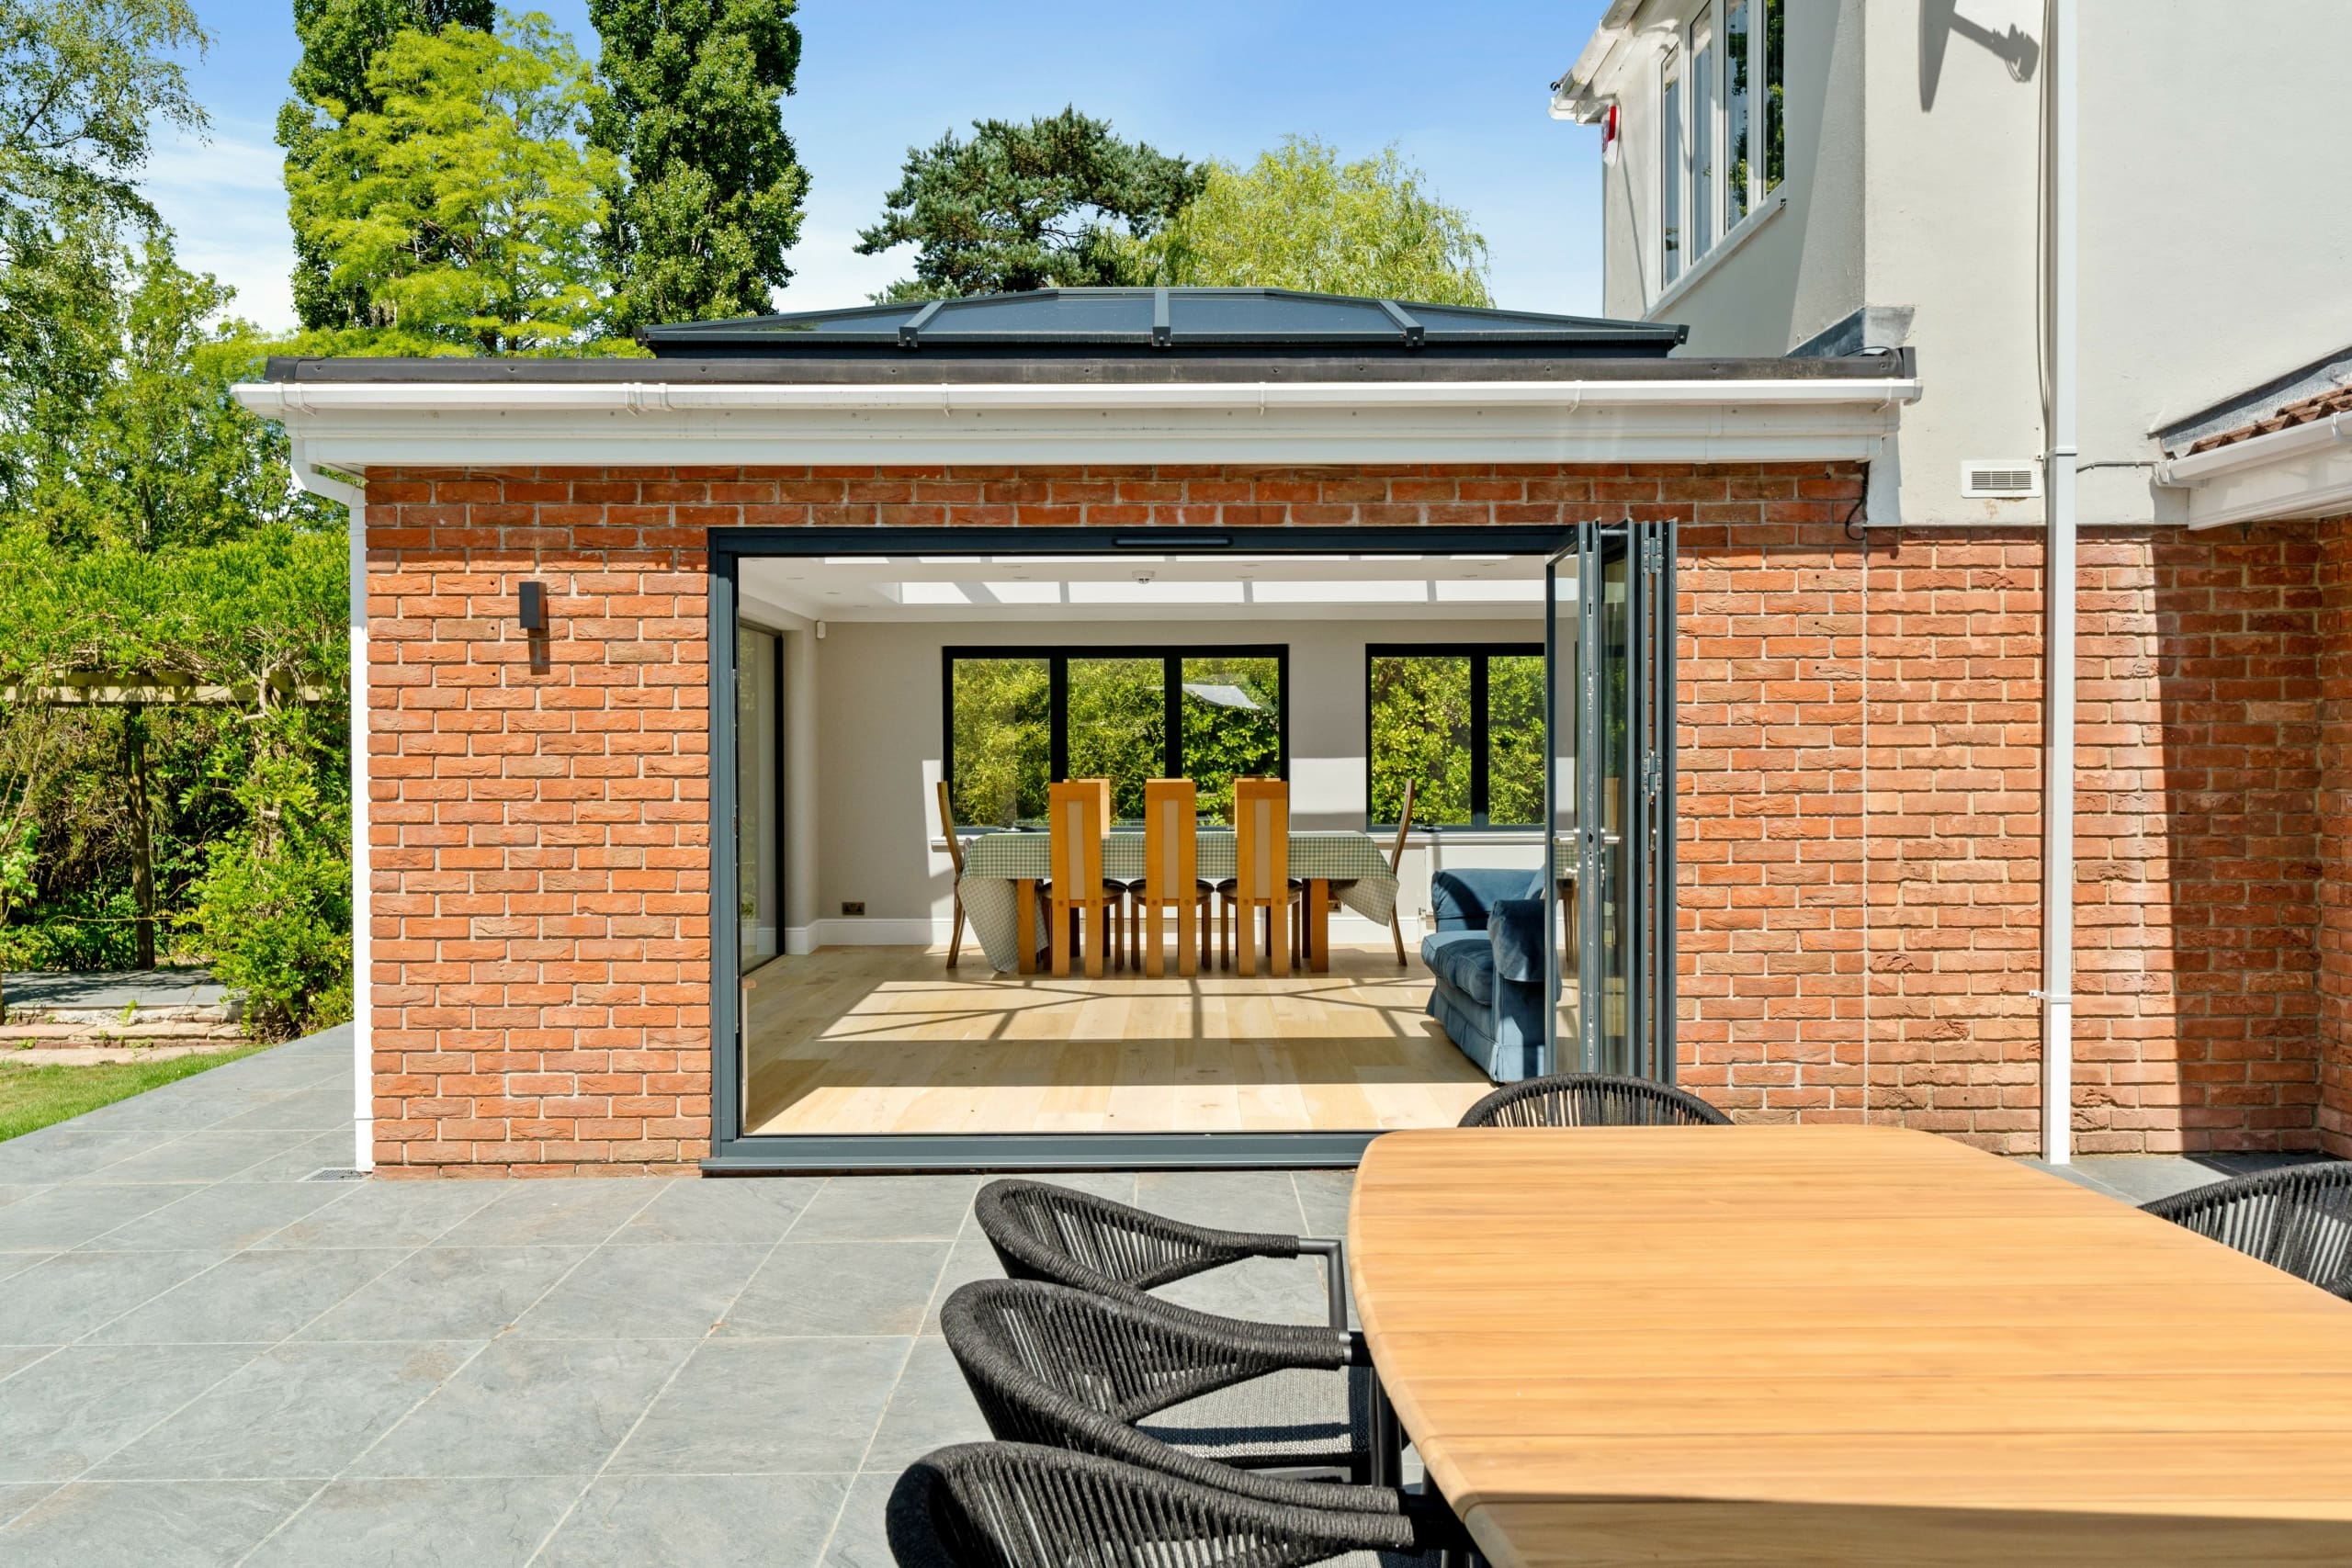 Beautiful modern home with rear bi-folding door on a bright sunny day with partial view of the garden and patio area.